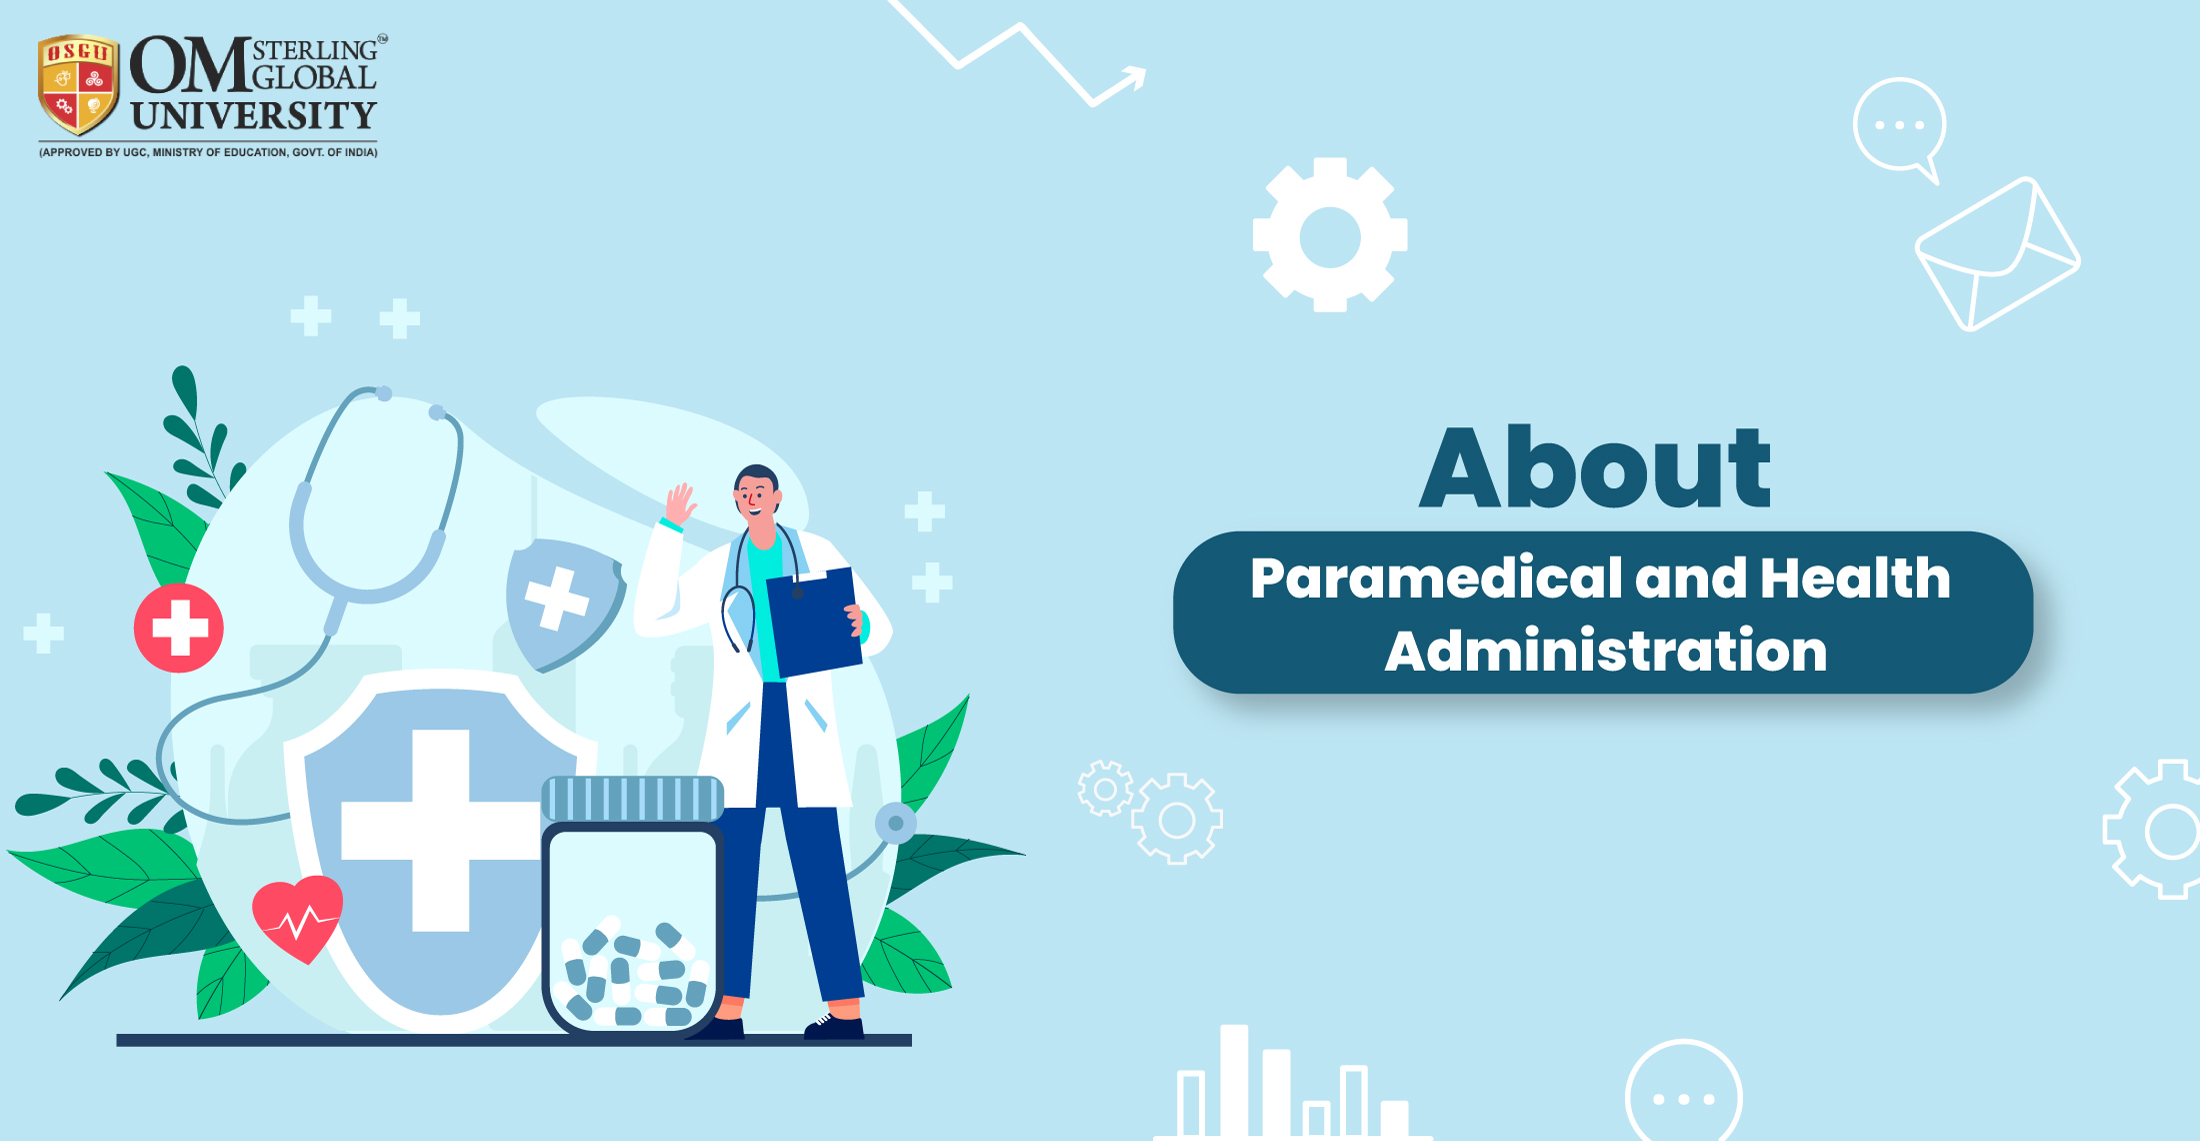 Paramedical and Health Administration